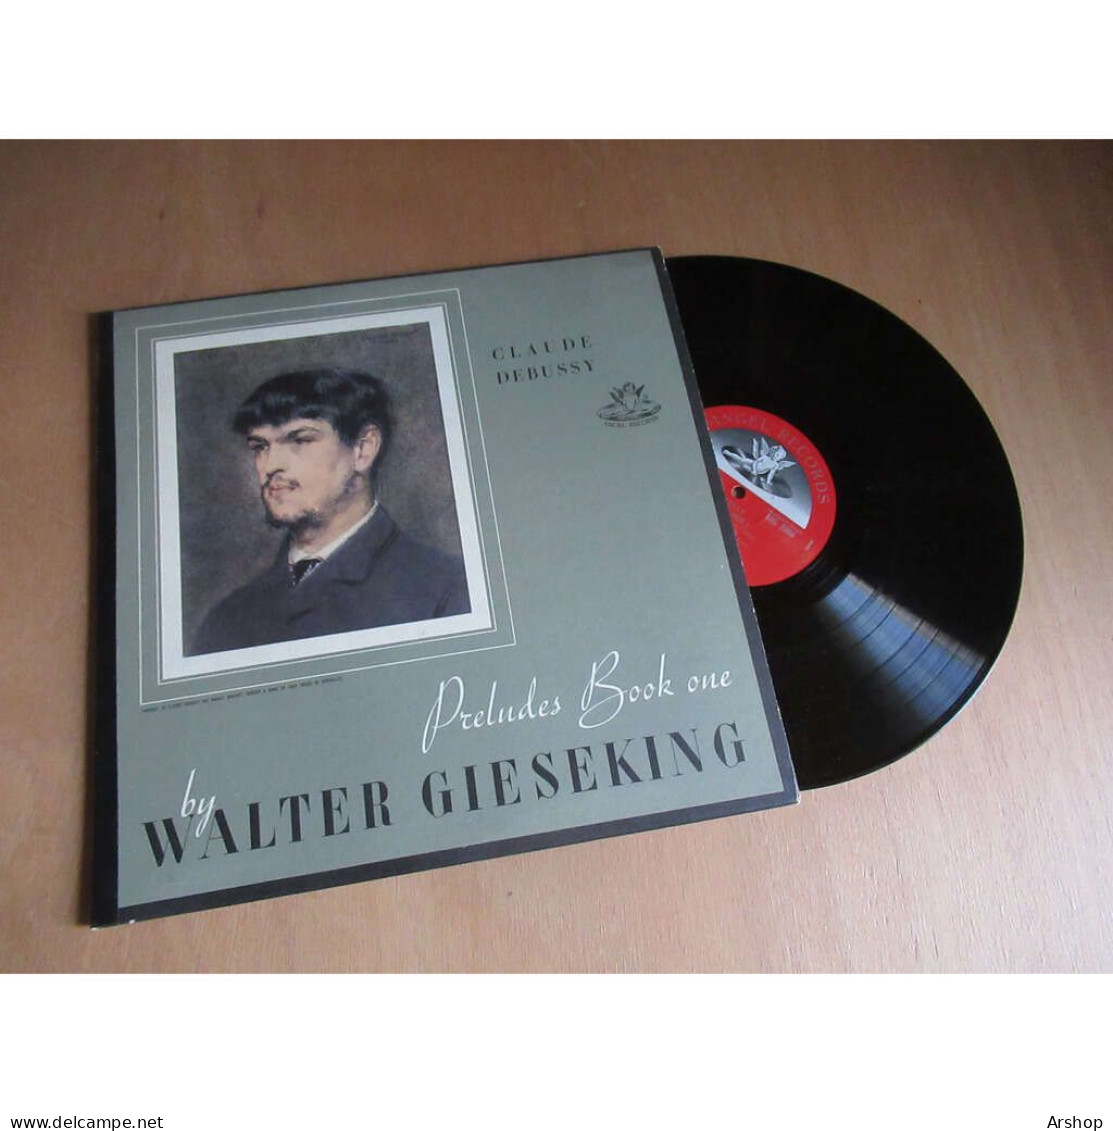 WALTER GIESEKING Preludes Book One DEBUSSY Piano Classique - ANGEL 35066 US Lp - Classique